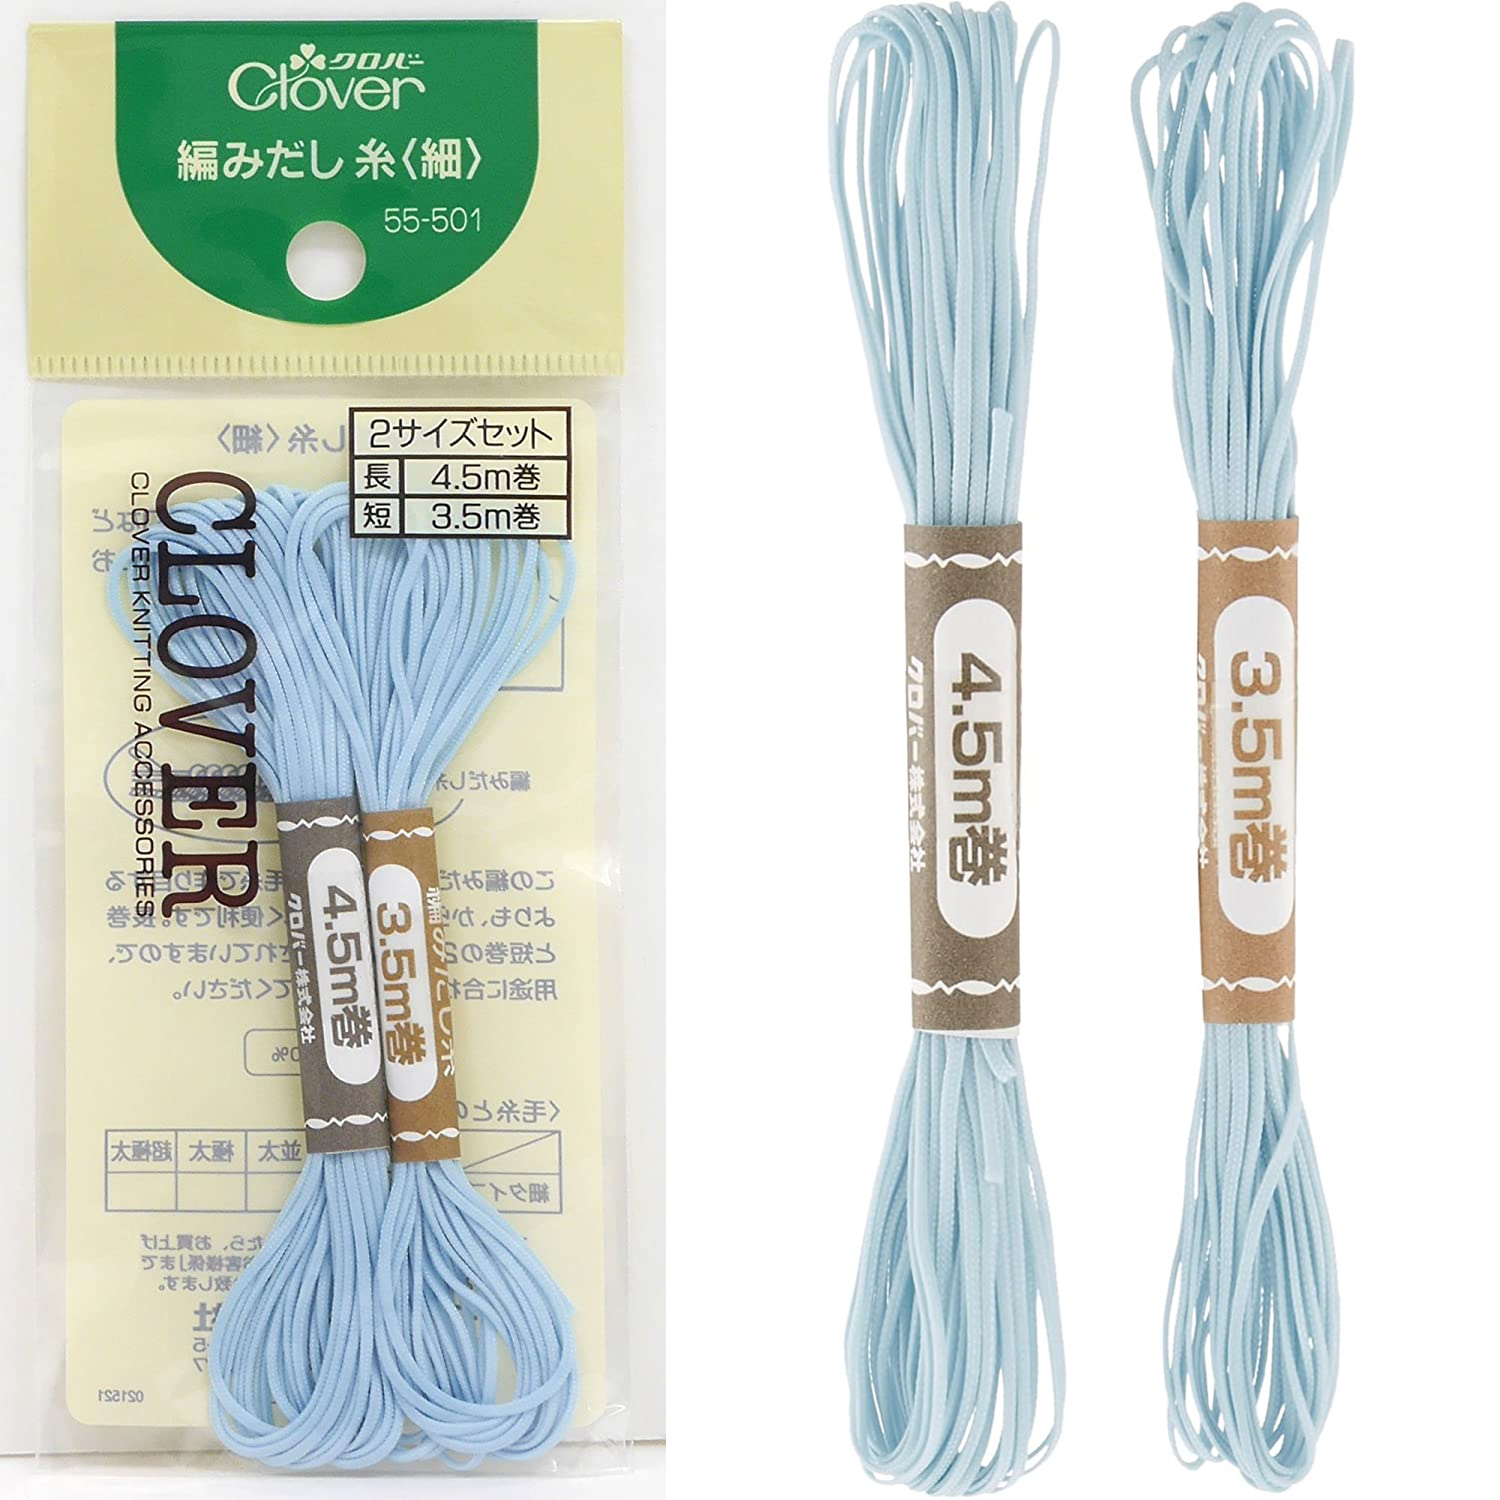 CL55-501 Clover Braid for Knitting, thin type (pcs)